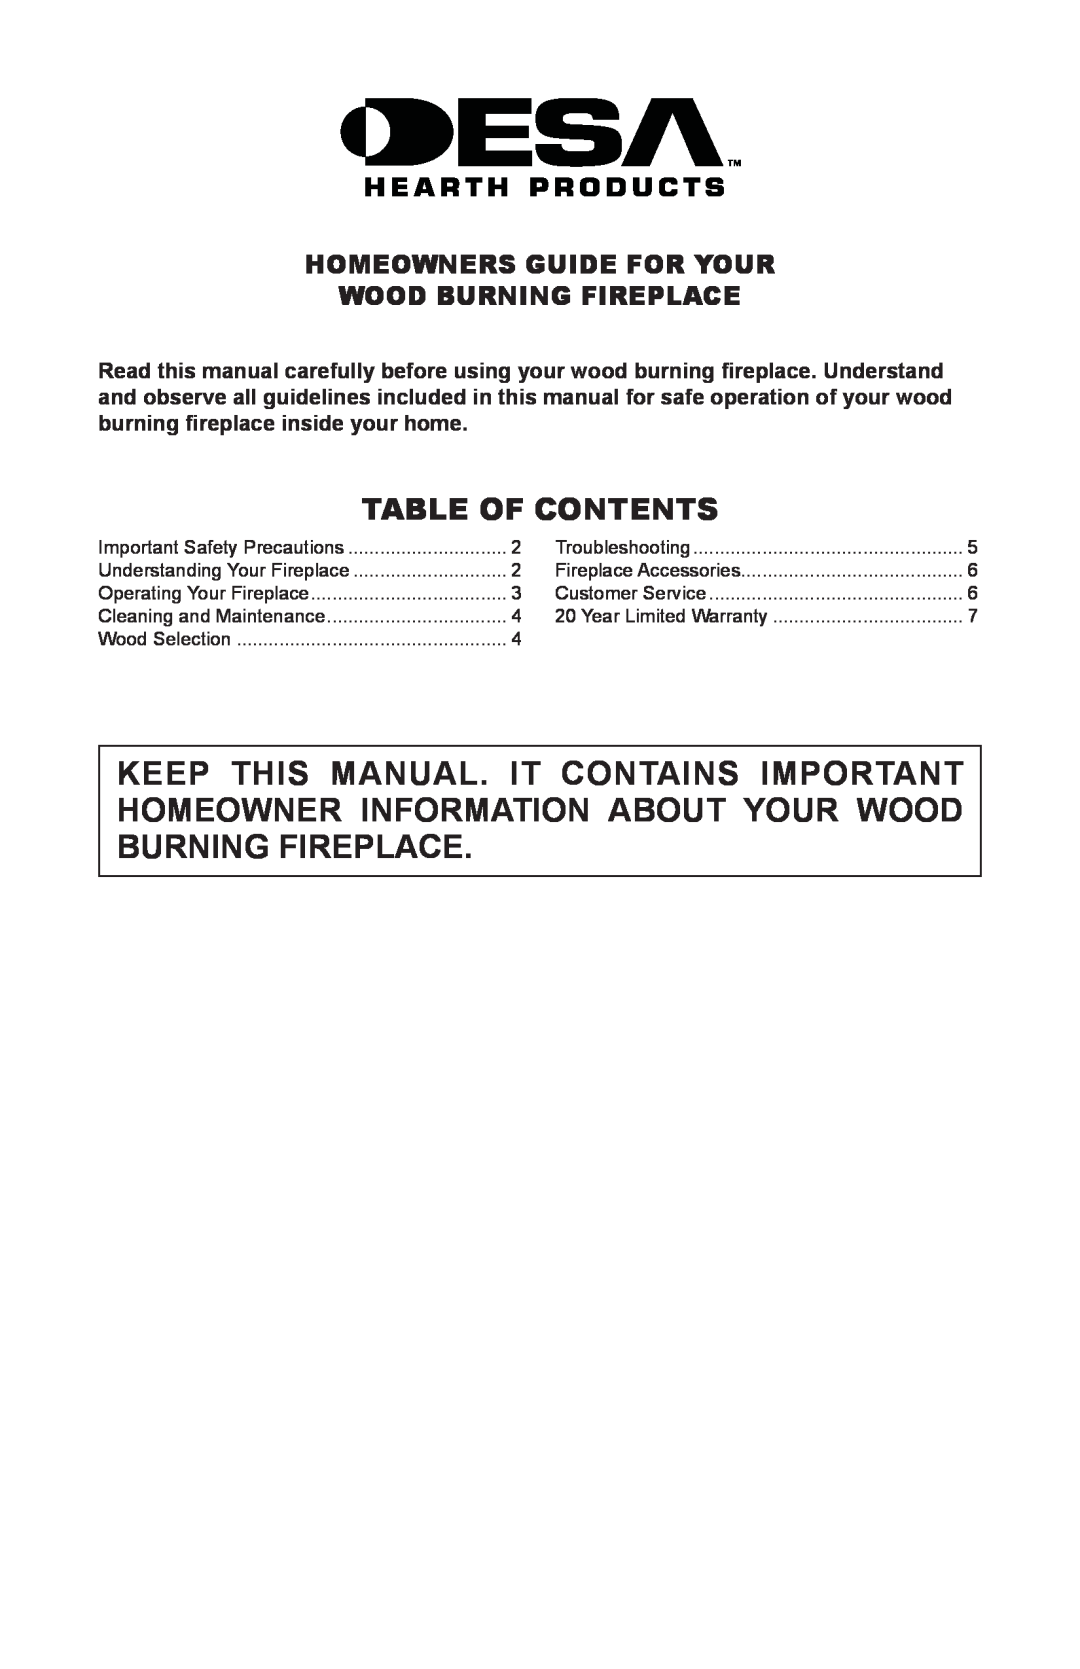 Desa warranty Table of Contents, HOMEOWNERS GUIDE FOR YOUR Wood Burning Fireplace, Important Safety Precautions 